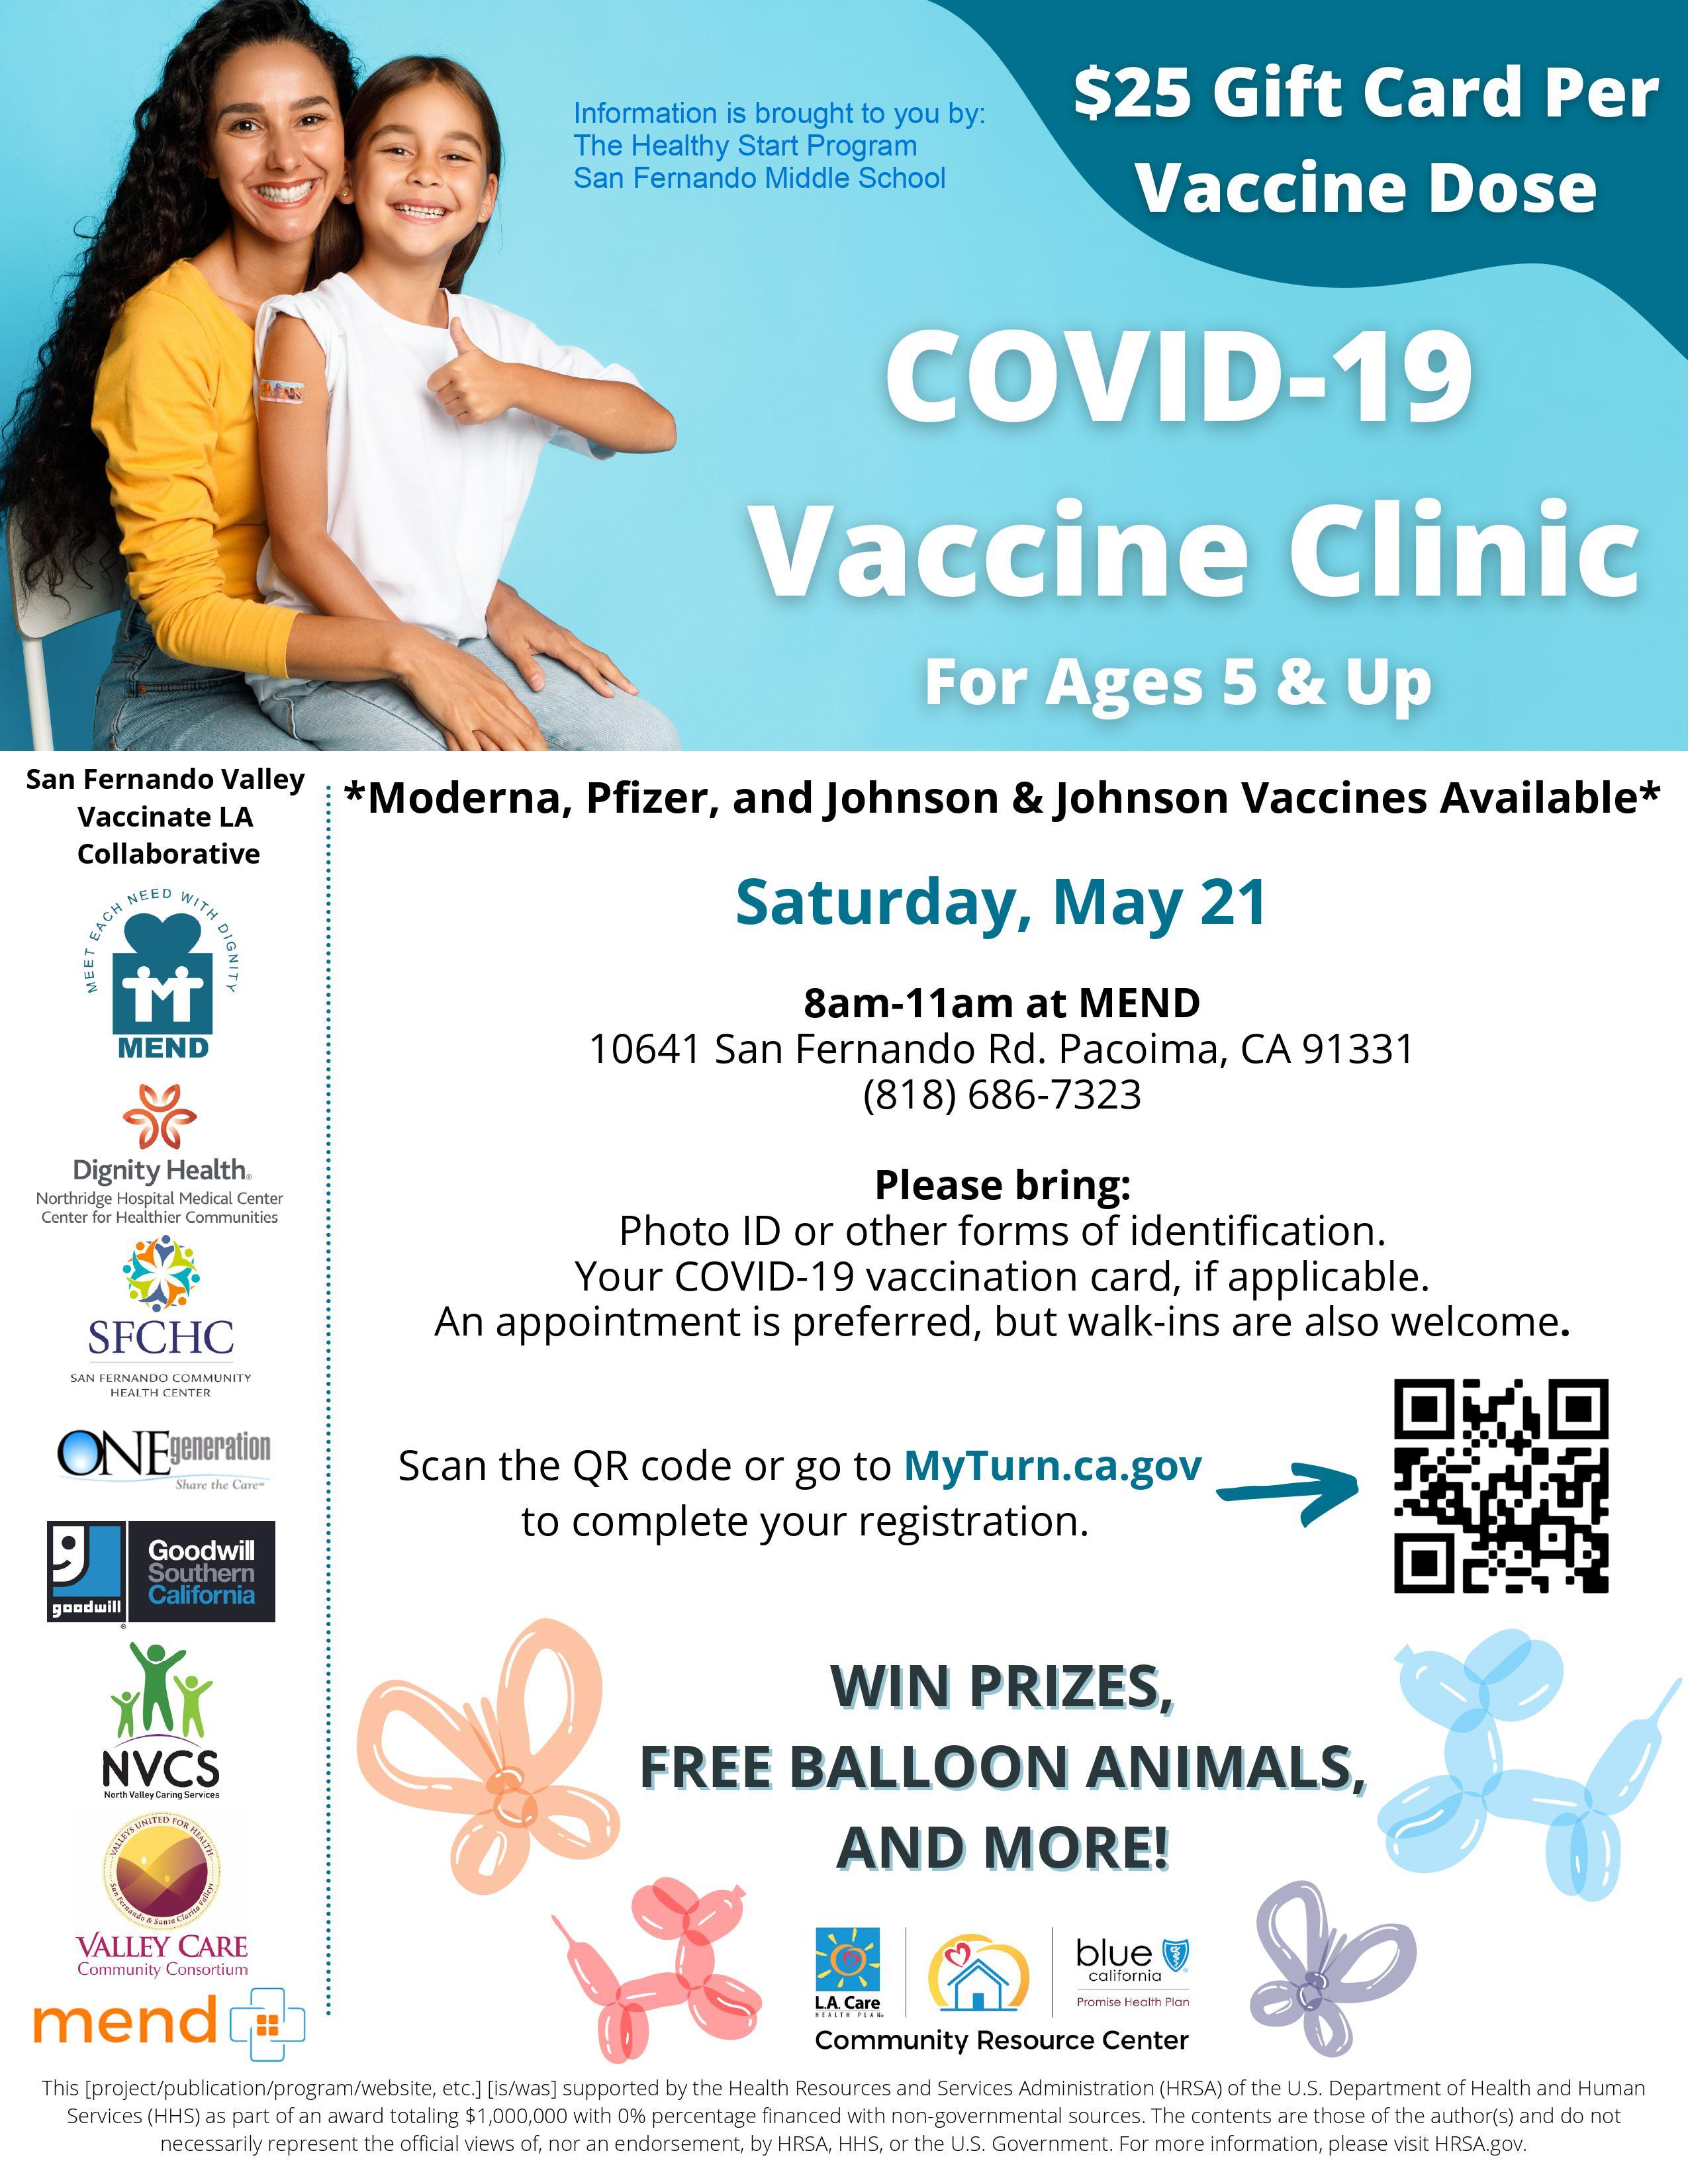 MEND Vax Clinic Event 5/21